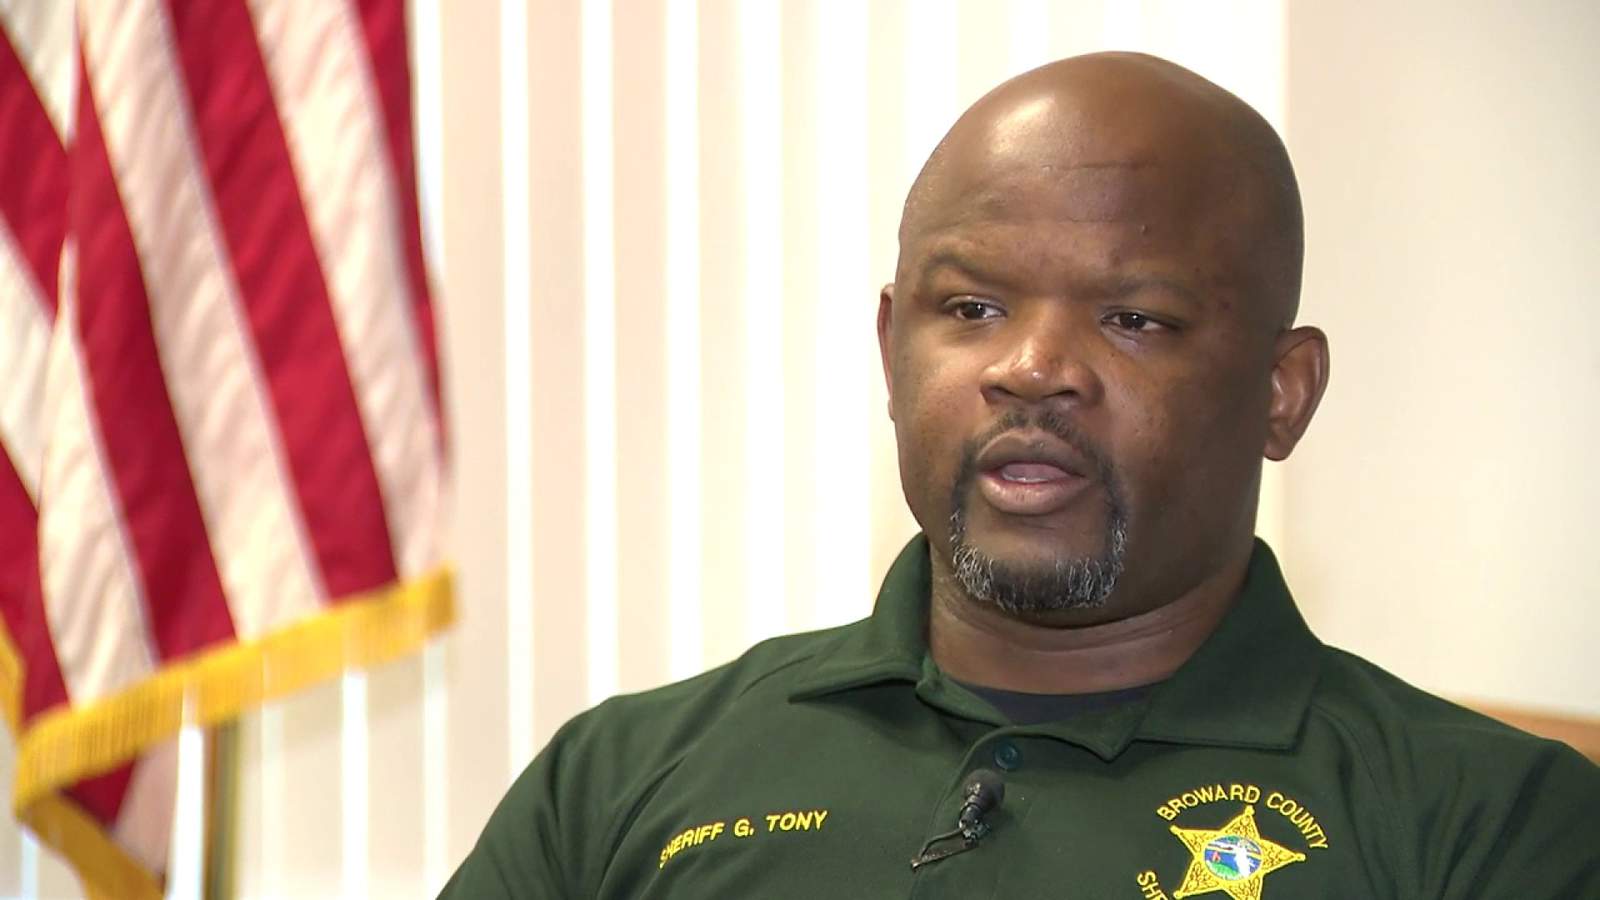 Sheriff Gregory Tony goes on record about shooting, killing a man 27 years ago